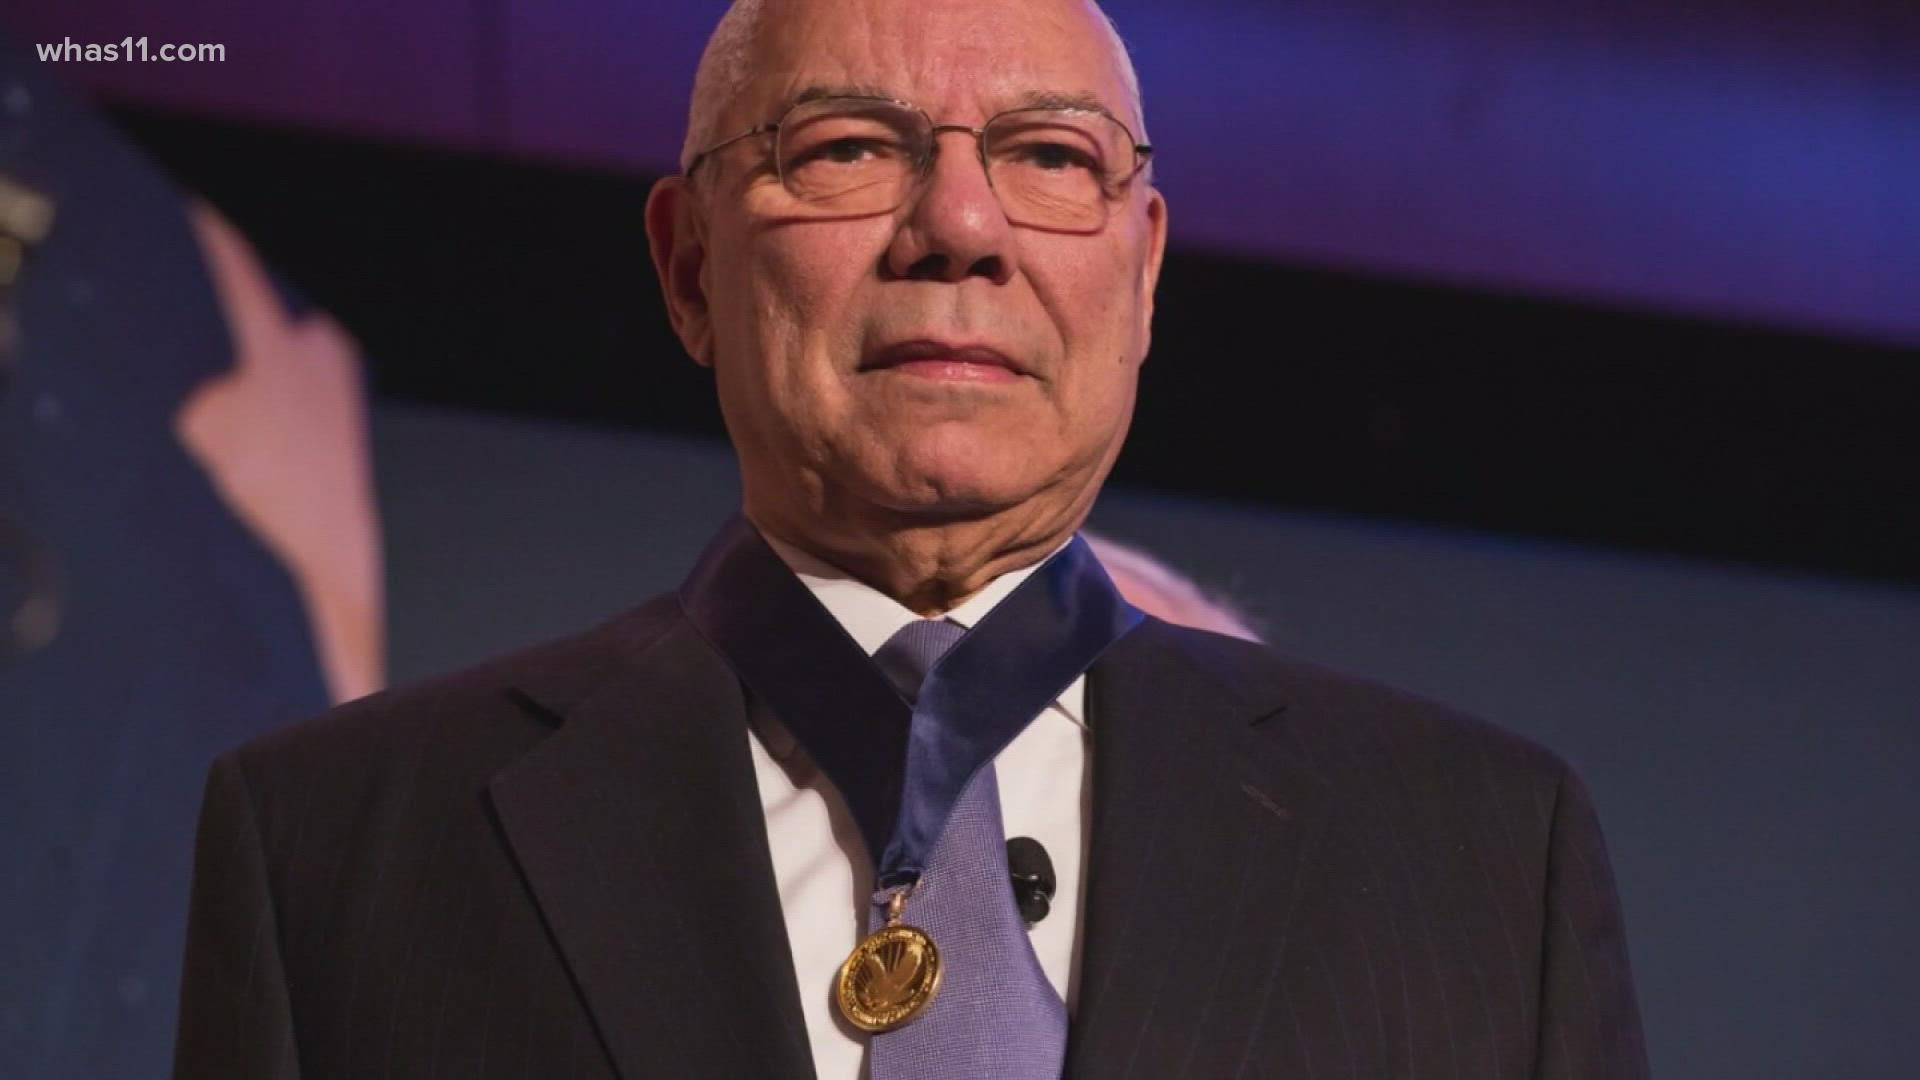 Colin Powell served under 4 American Presidents.